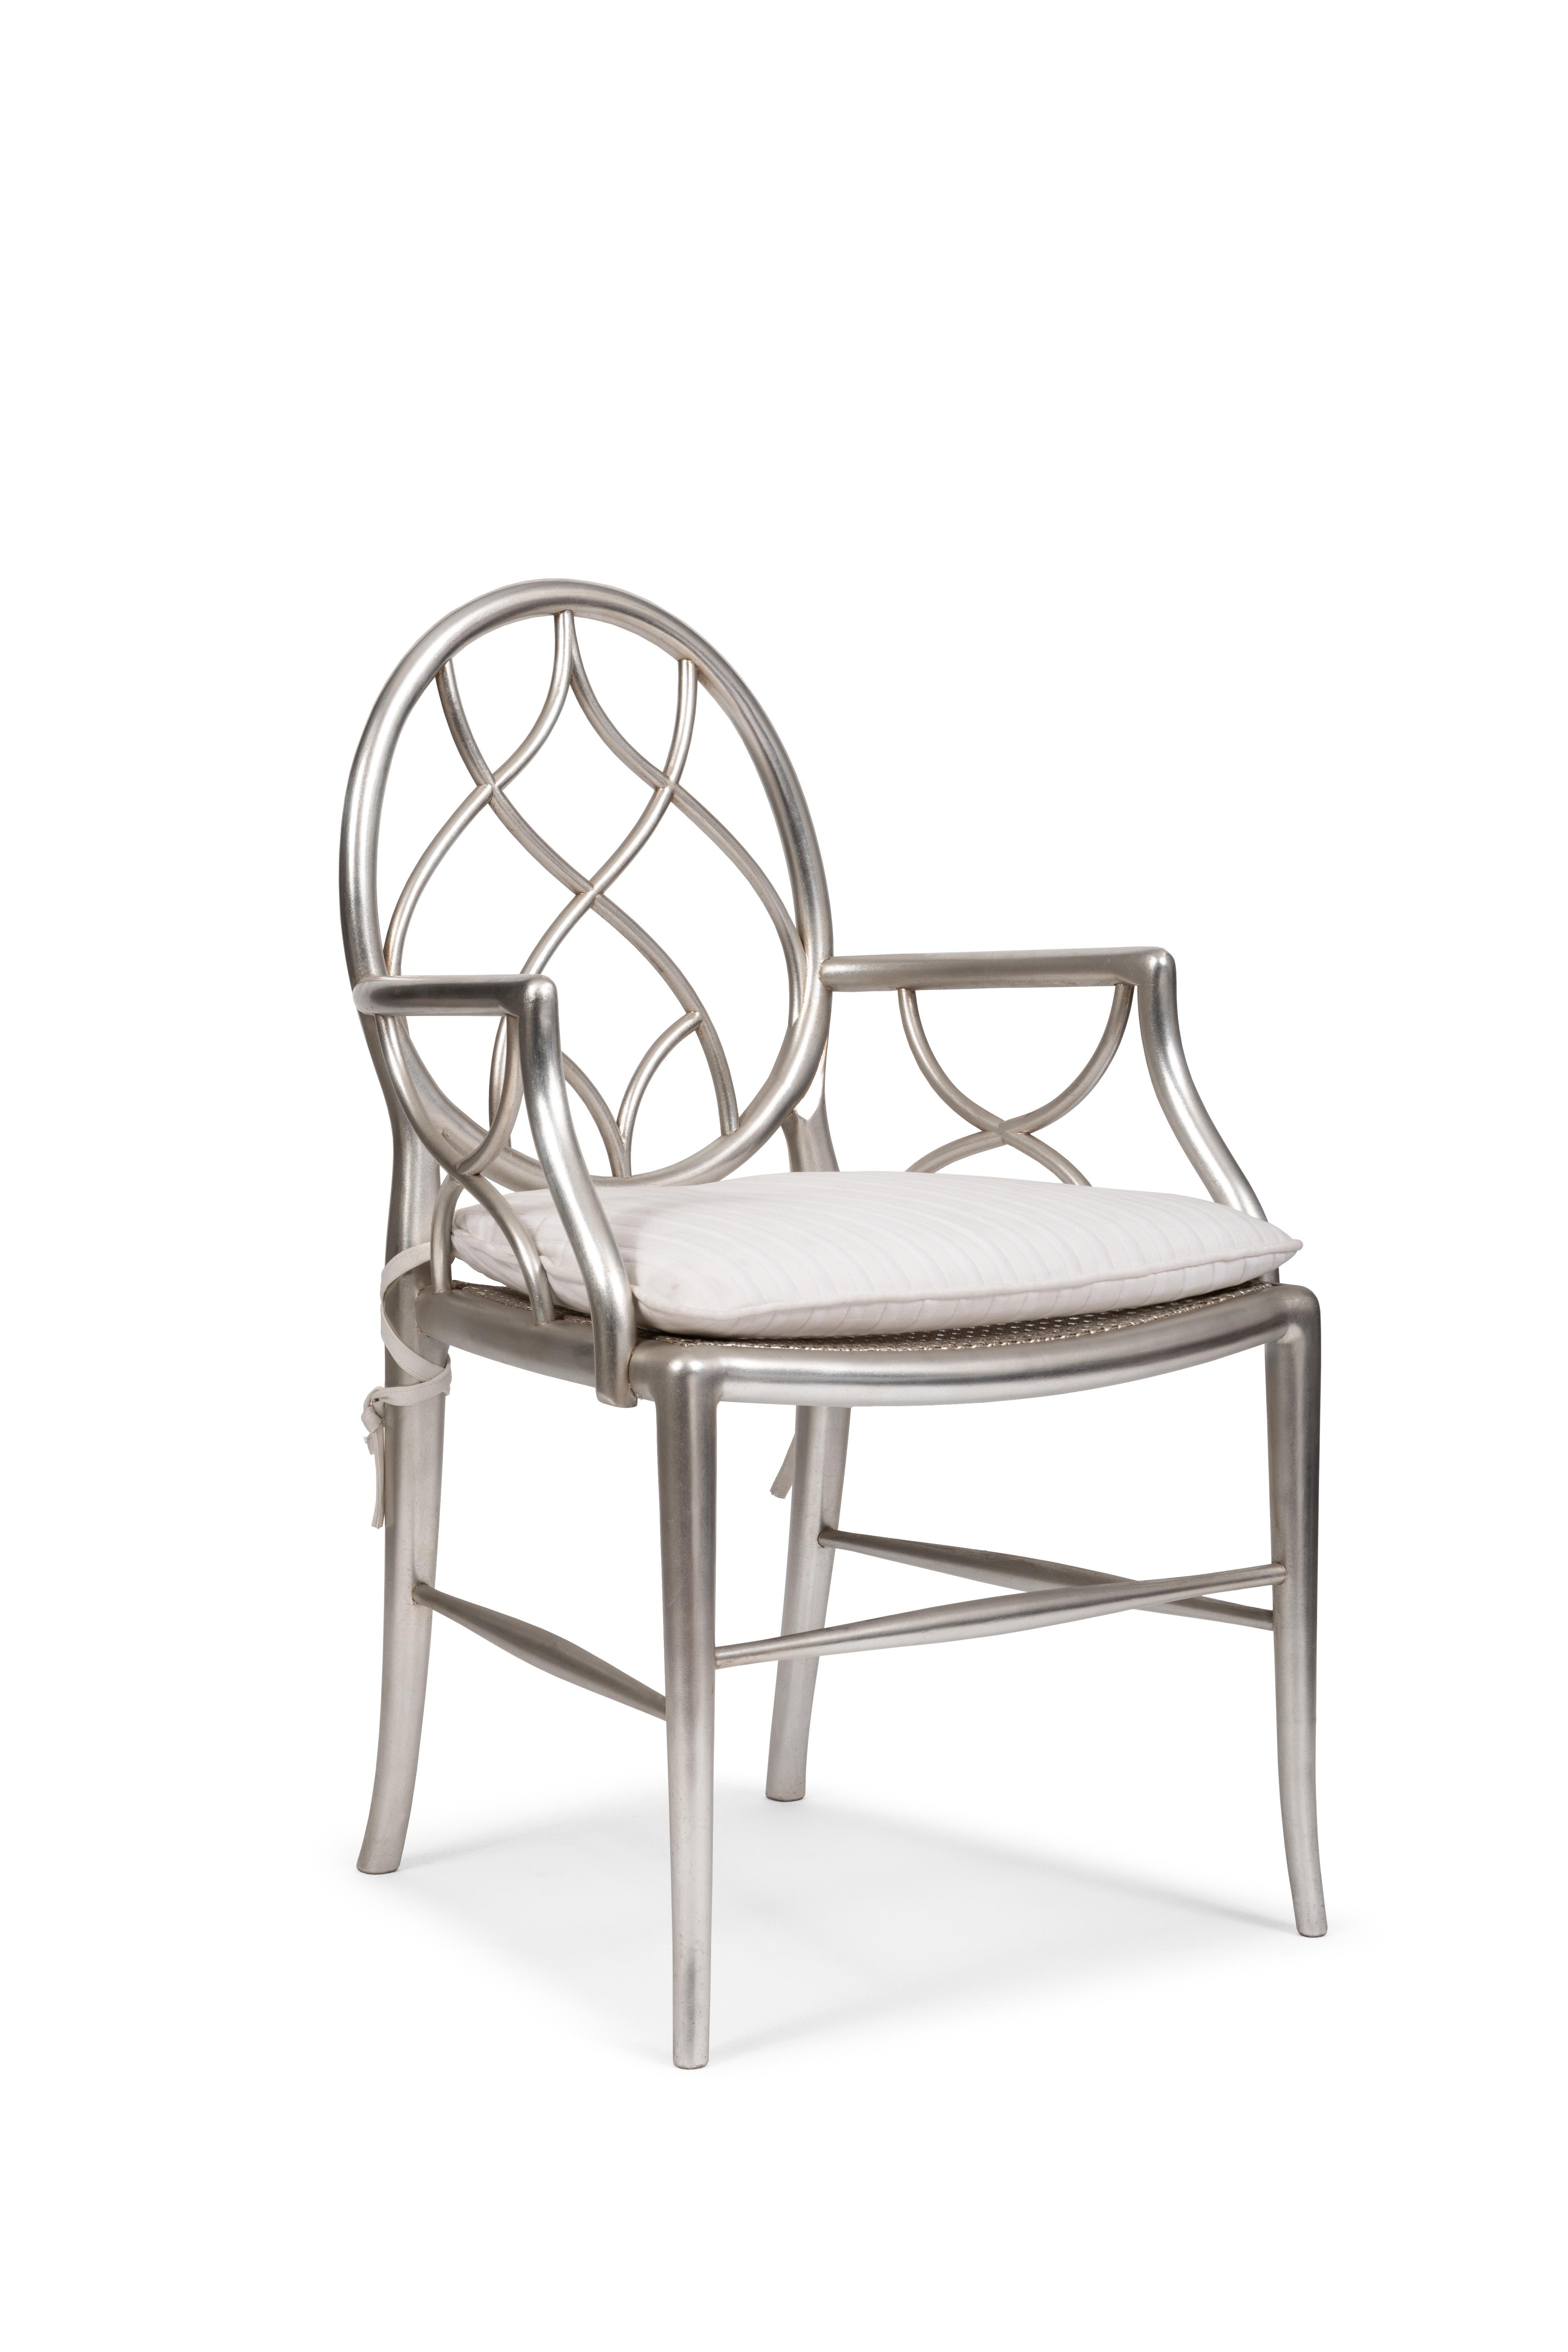 Decorative dining chair with armrests. This armchair was designed by Belloni in 1990 and included in its 